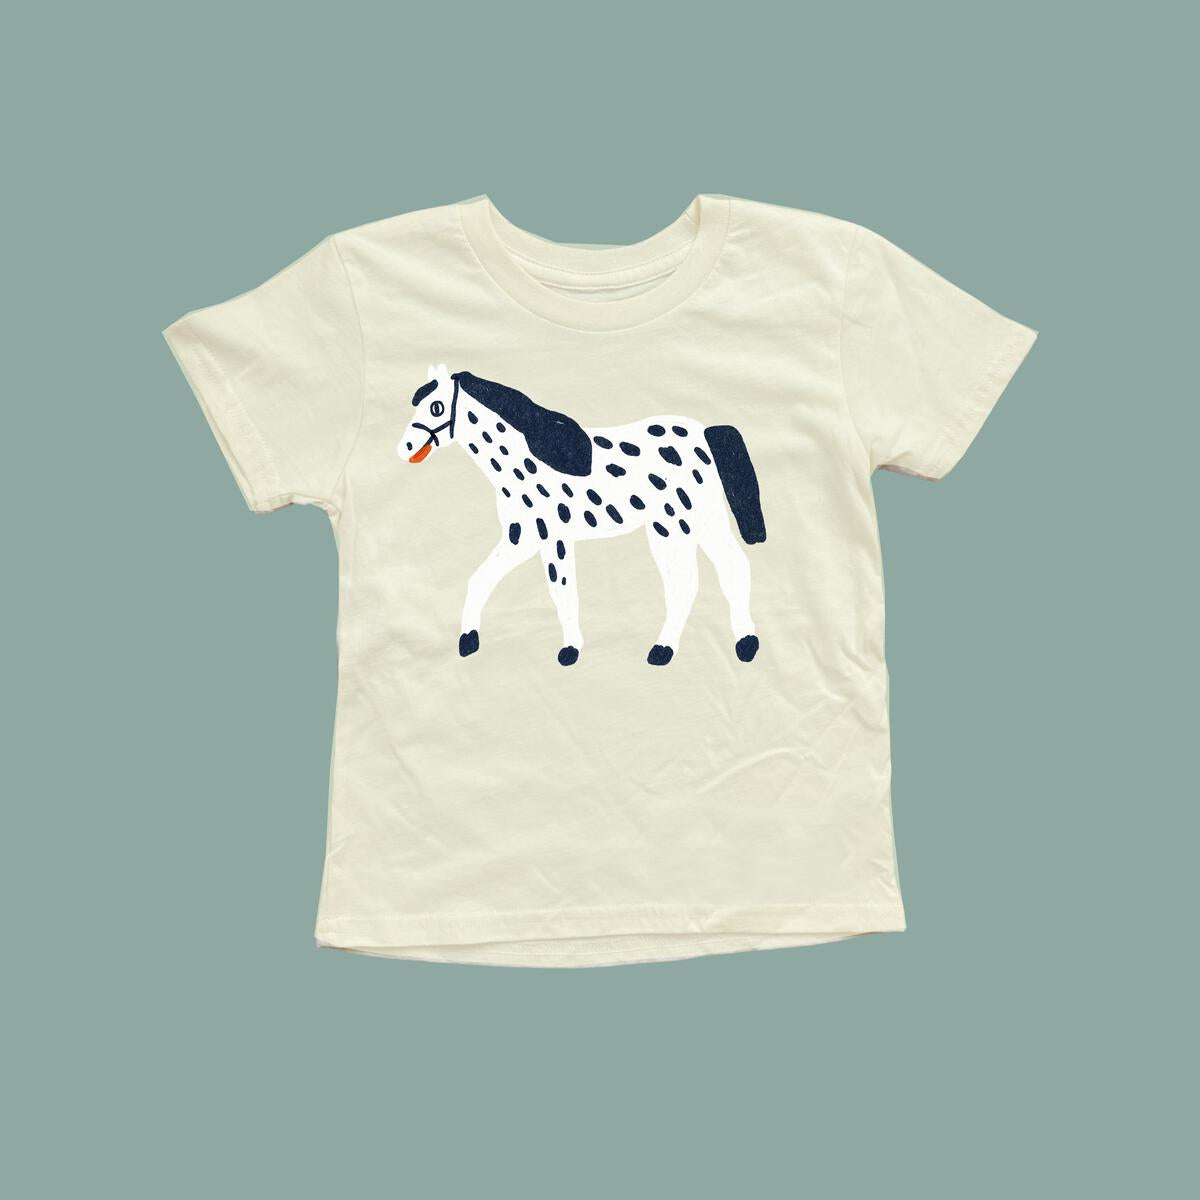 Apollo The Horse Youth T-shirt